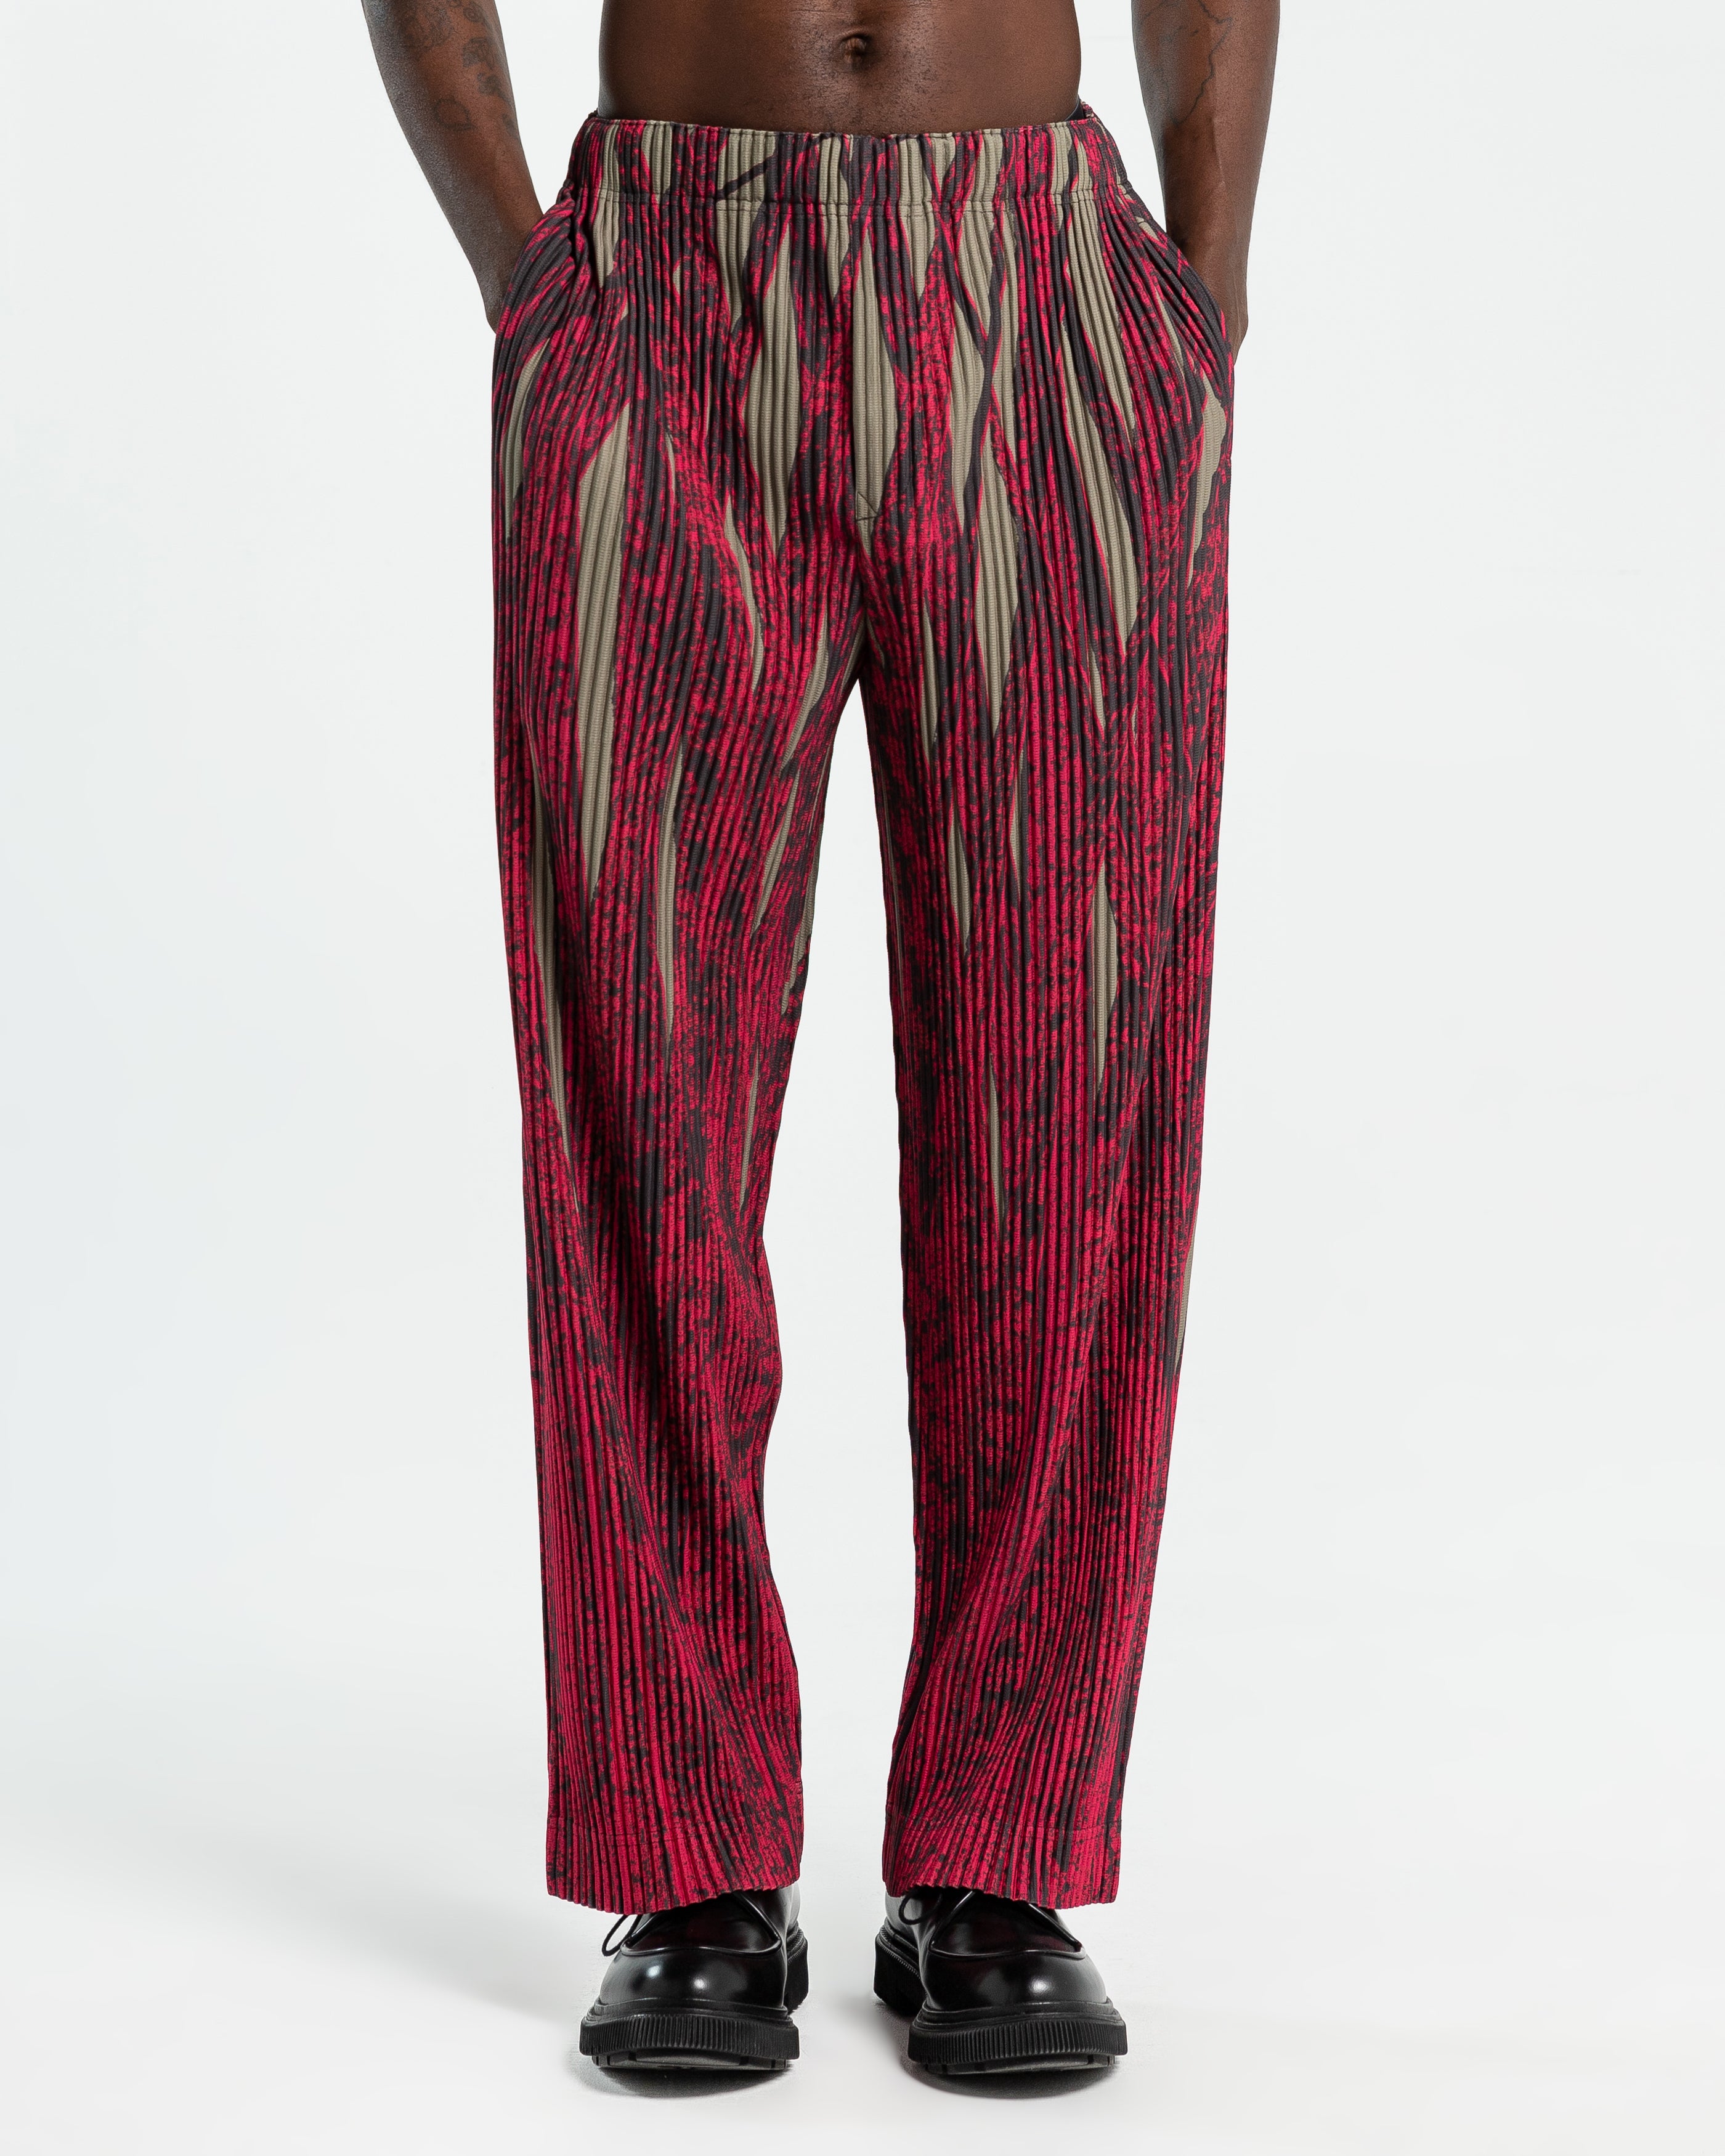 Grass Field Pants in Red